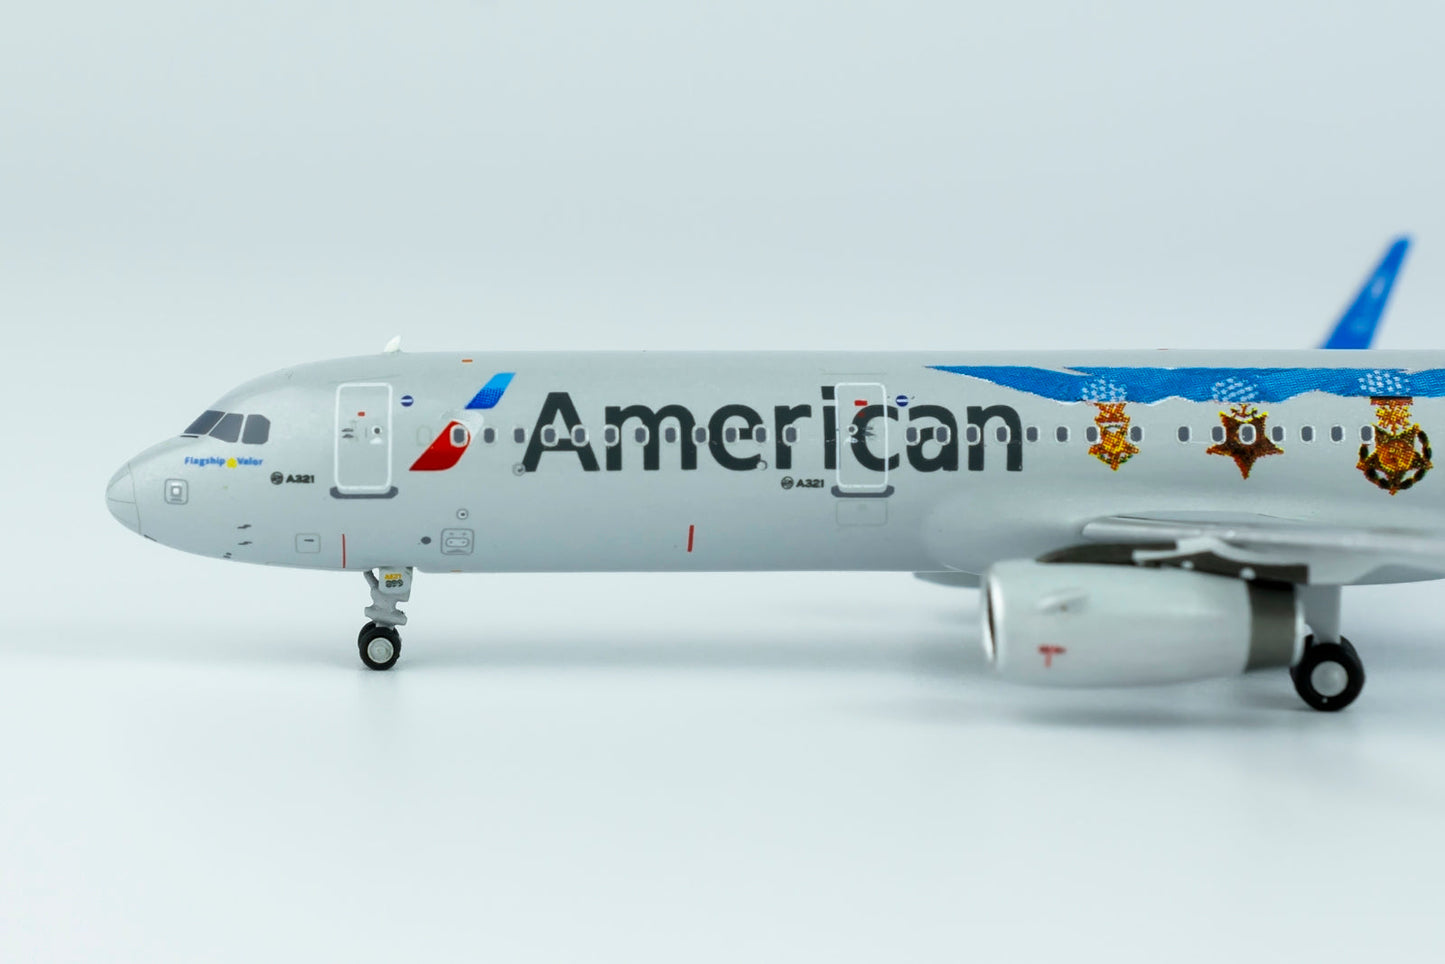 *1/400 American Airlines A321-200/w "Flagship Valor" NG Models 13039